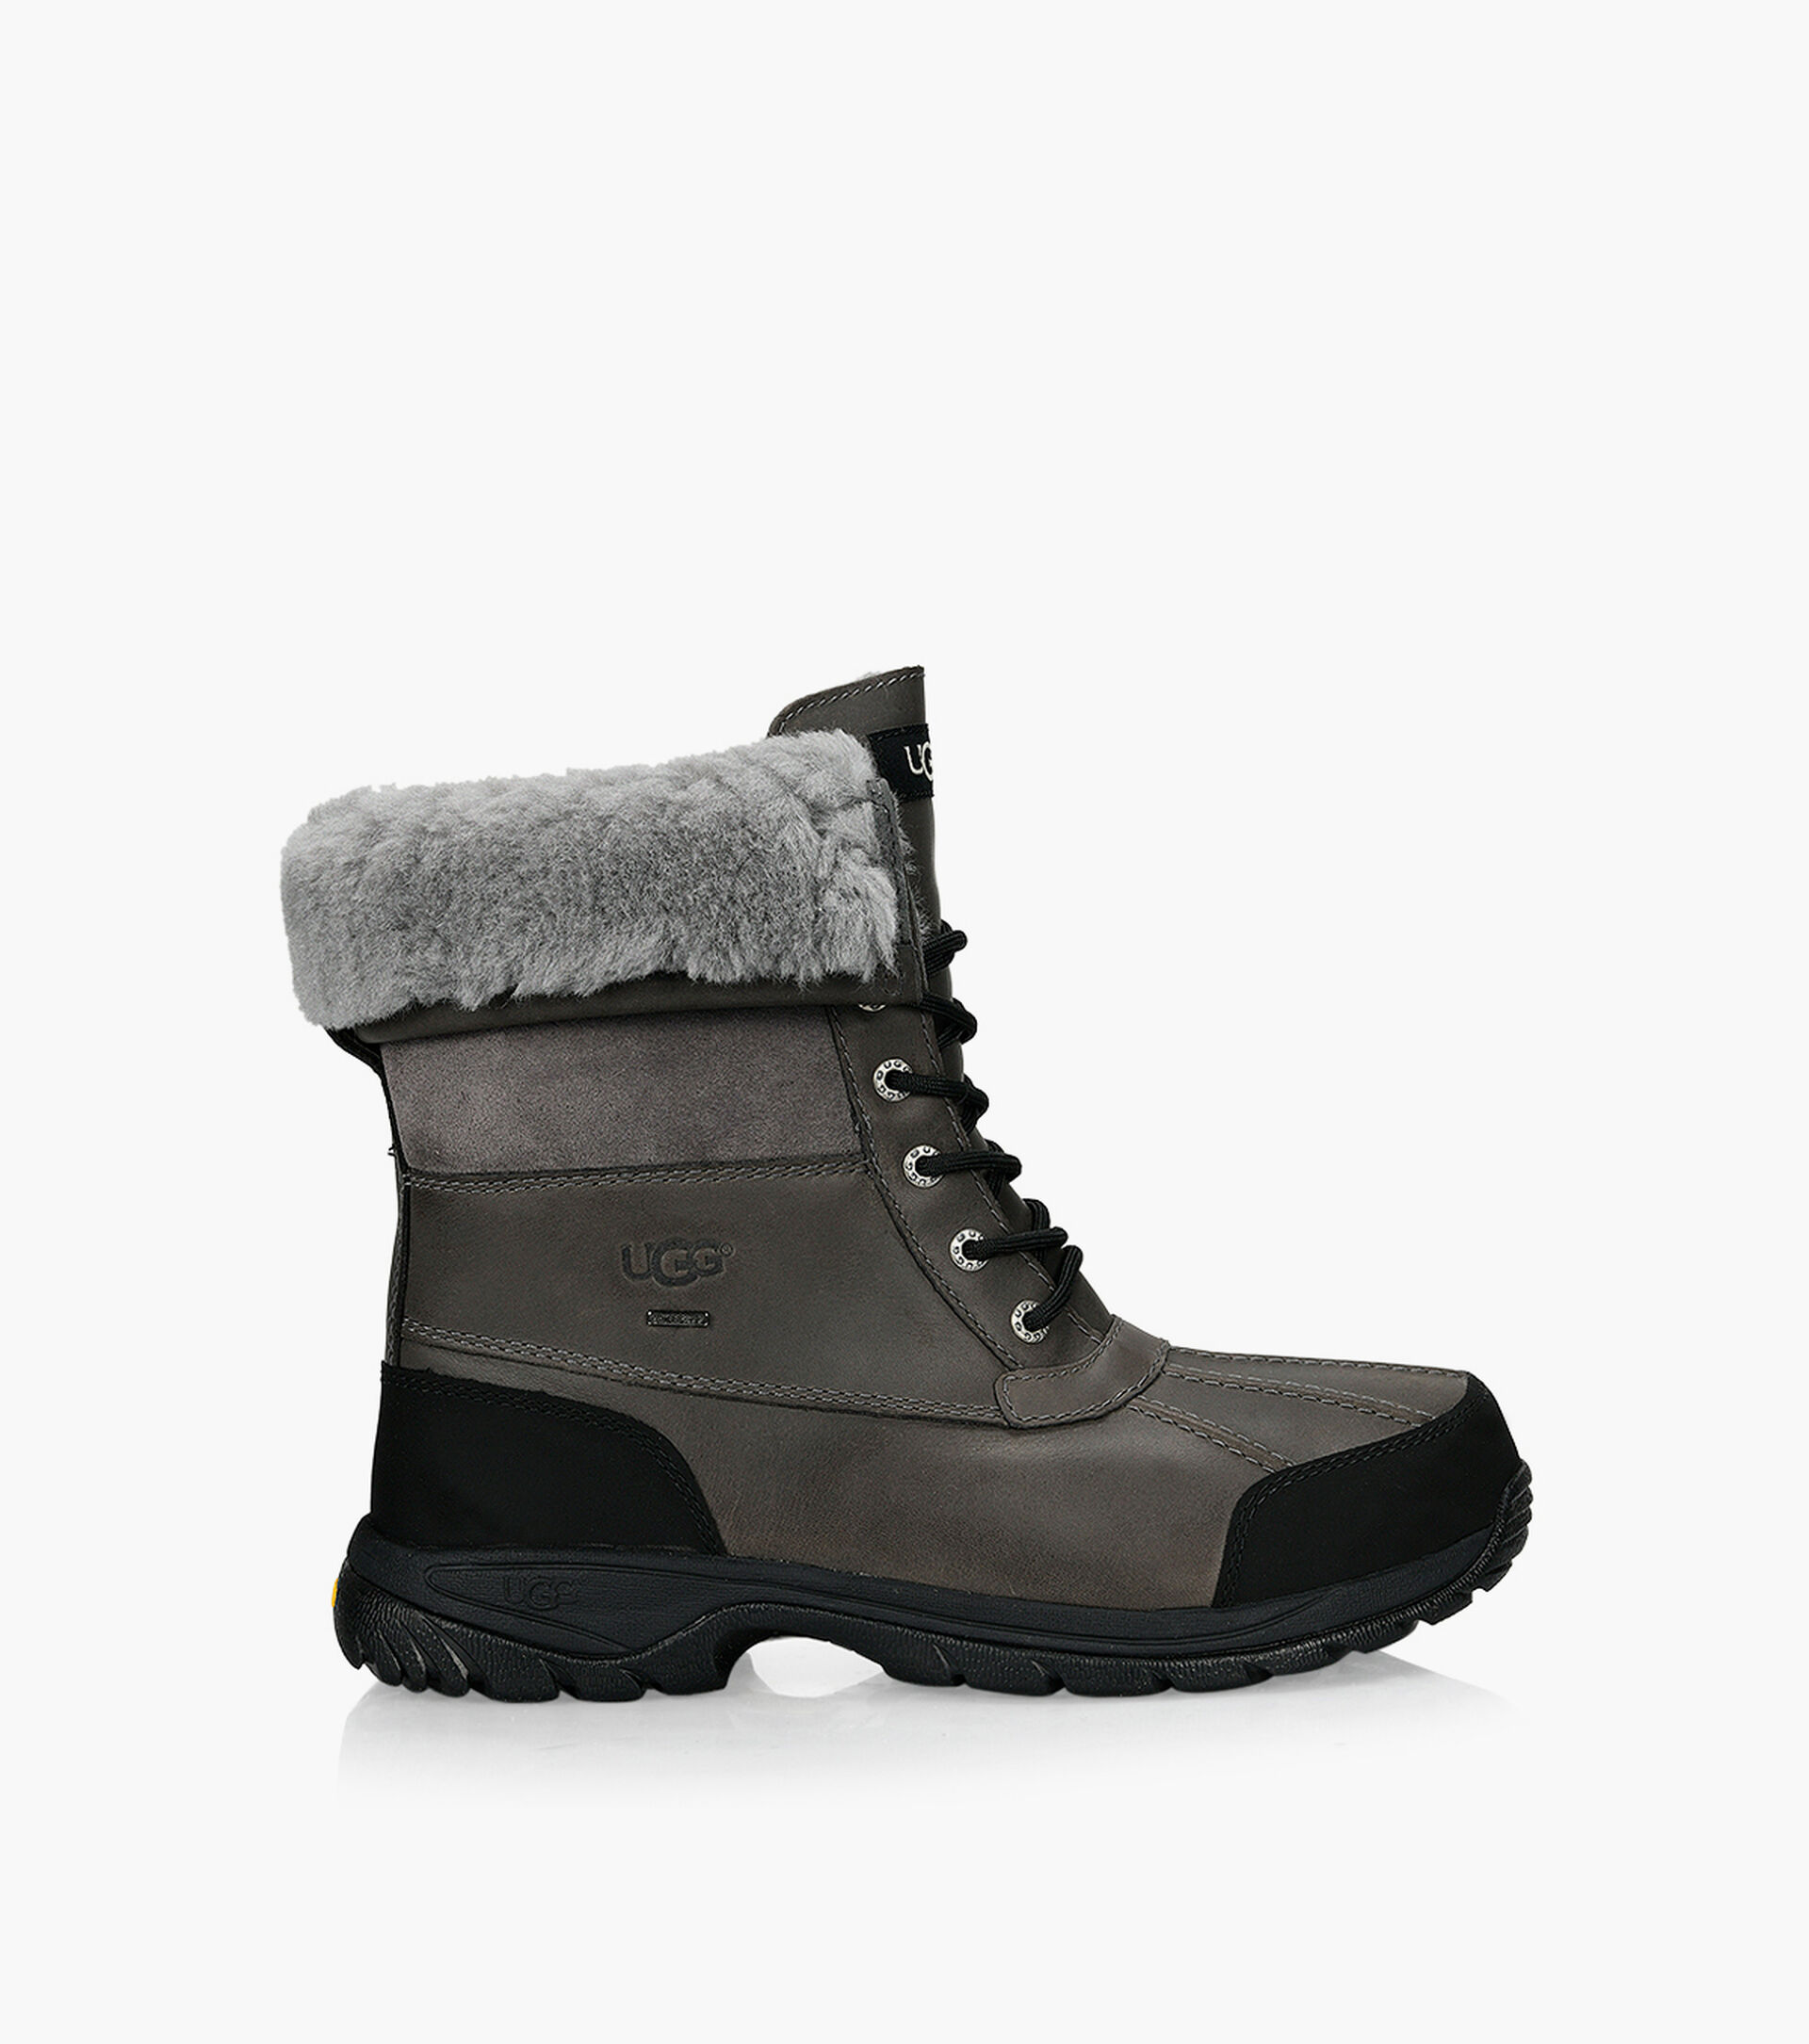 UGG BUTTE - Cuir | Browns Shoes